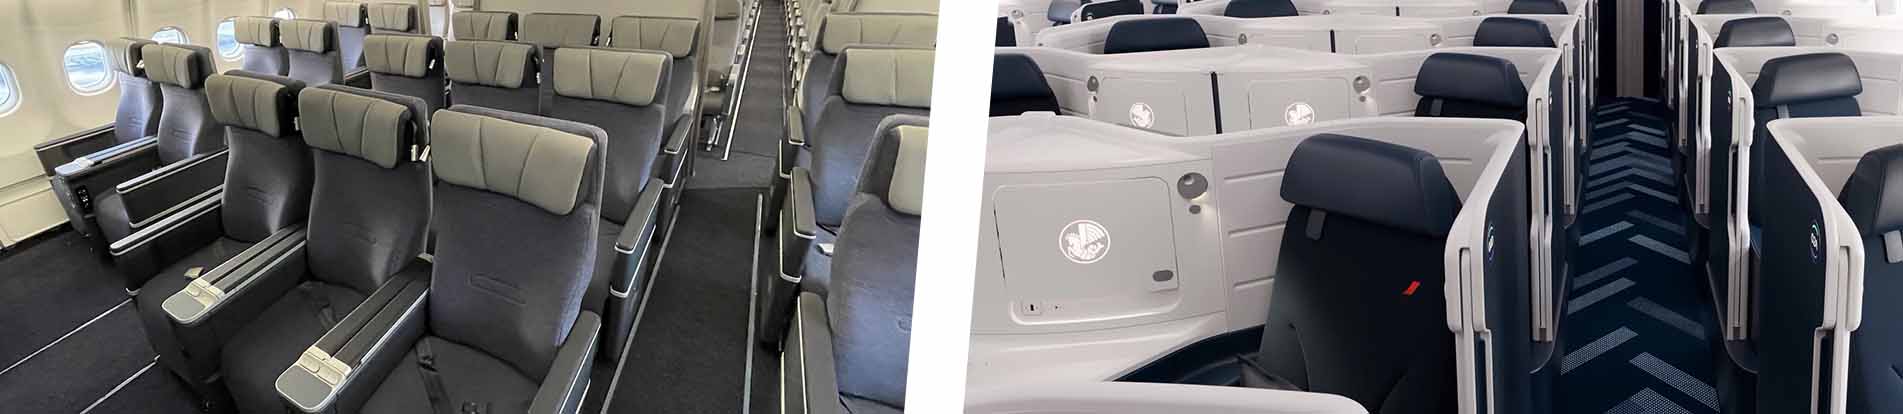 Difference Between Premium Economy and Business Class